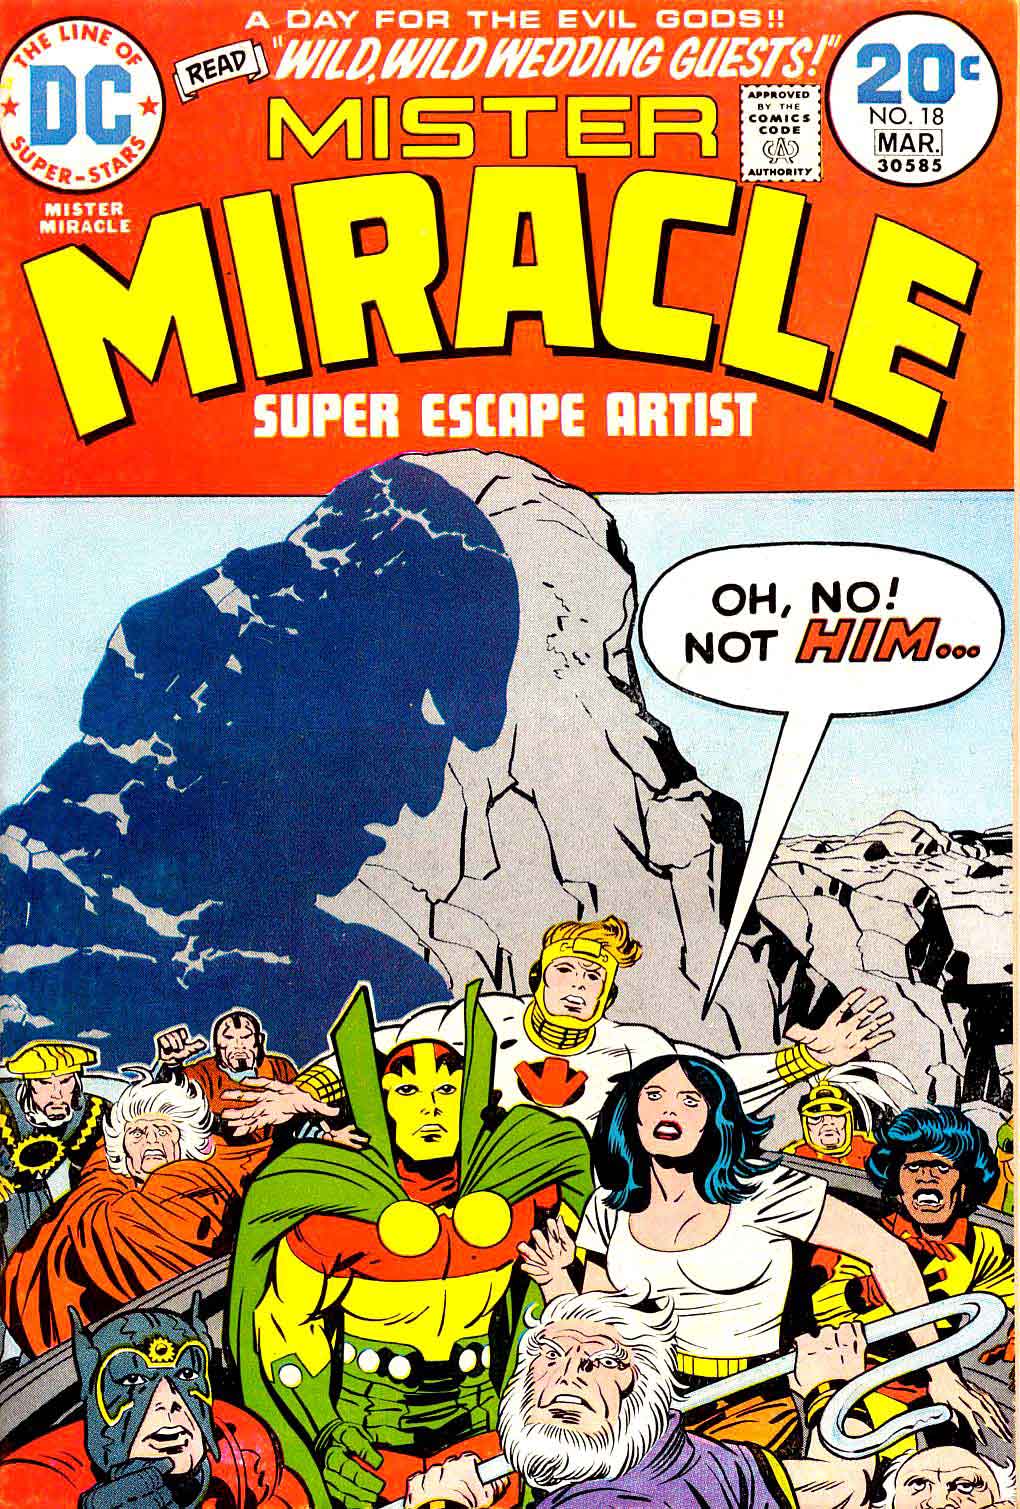 Mister Miracle v1 #1 dc bronze age comic book cover art by Jack Kirby